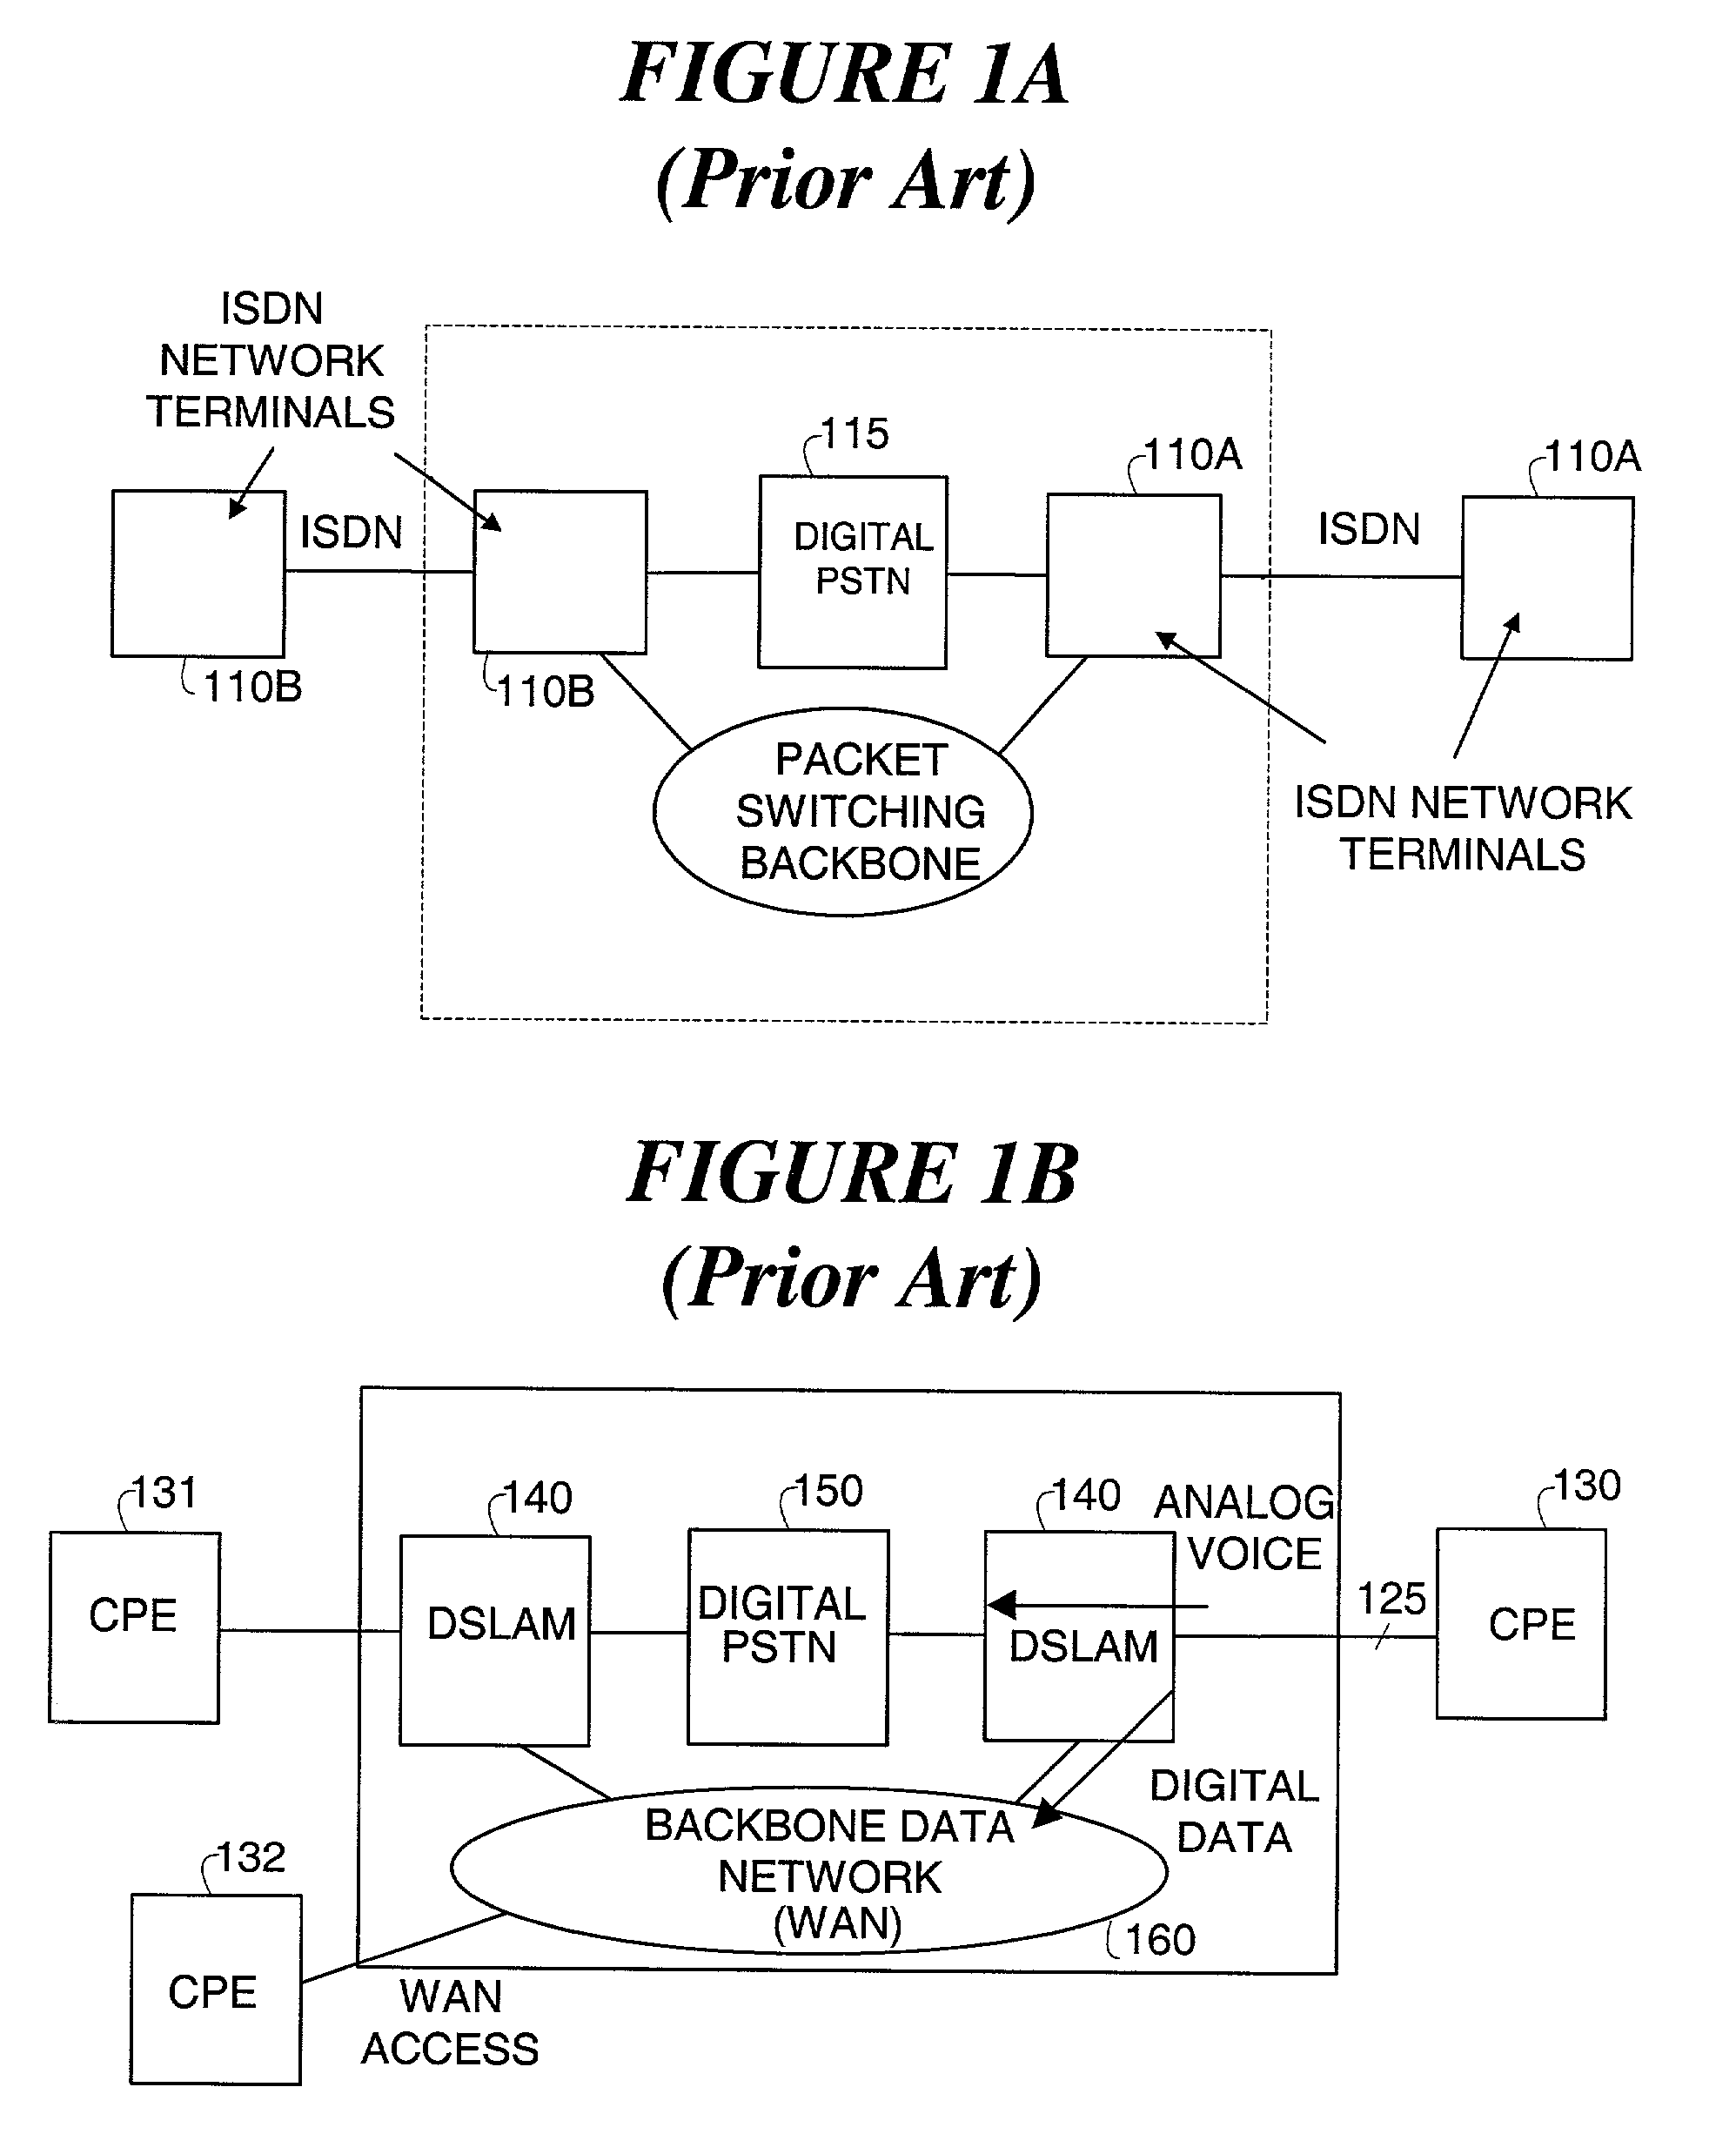 Configurable digital subscriber loop access and end-to-end data and analog voice connection system